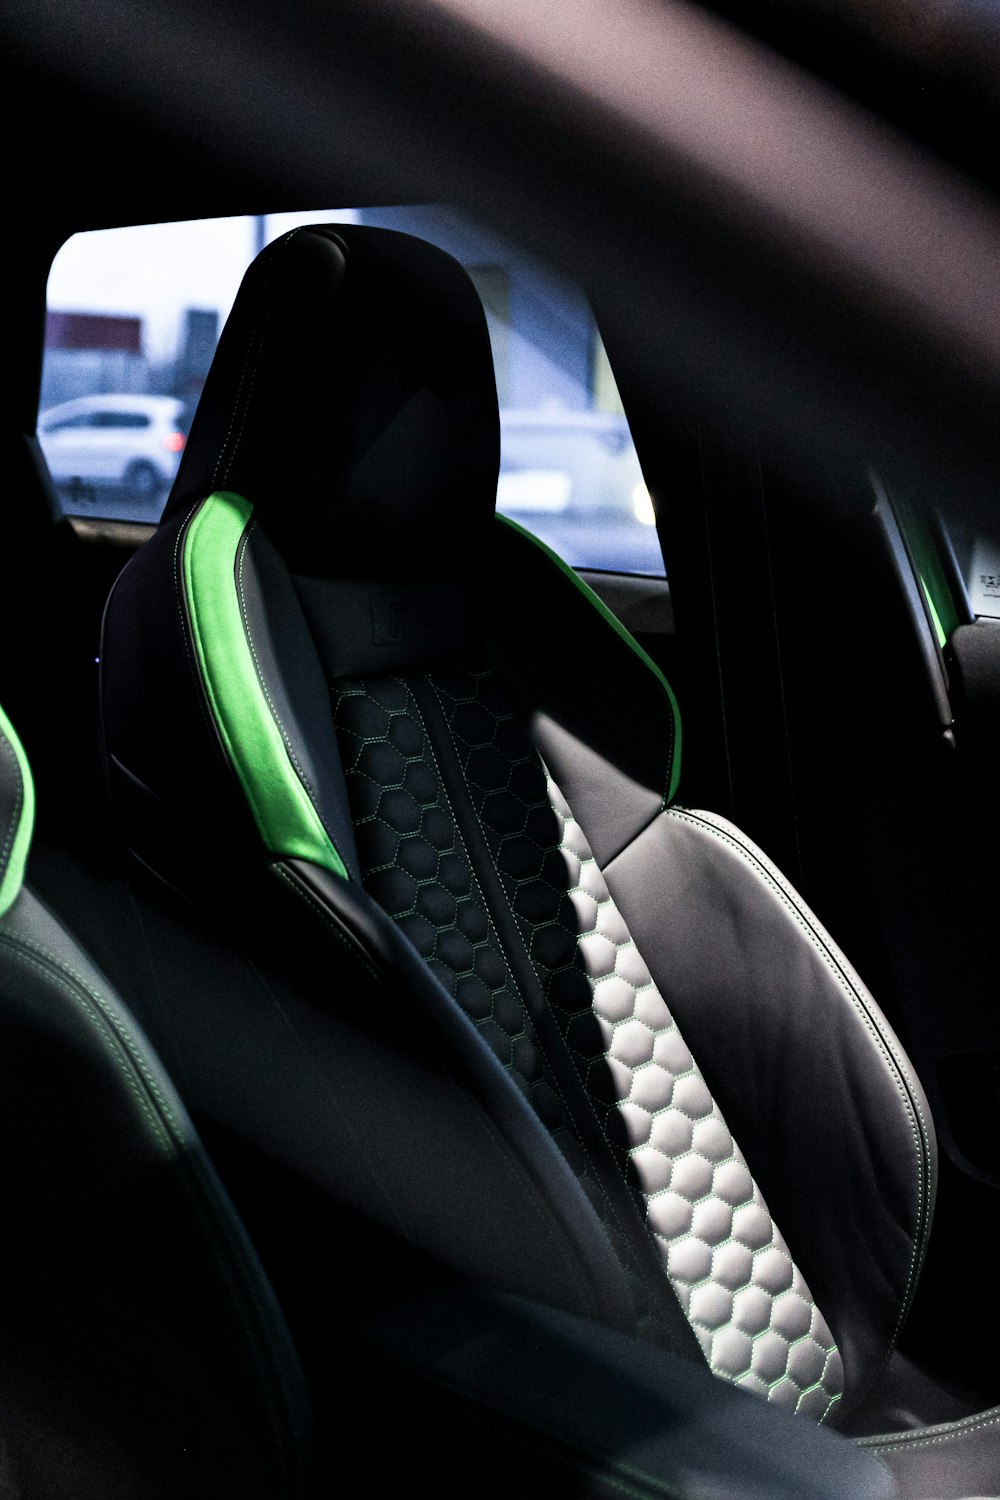 a close up of a car's seats with neon green trim